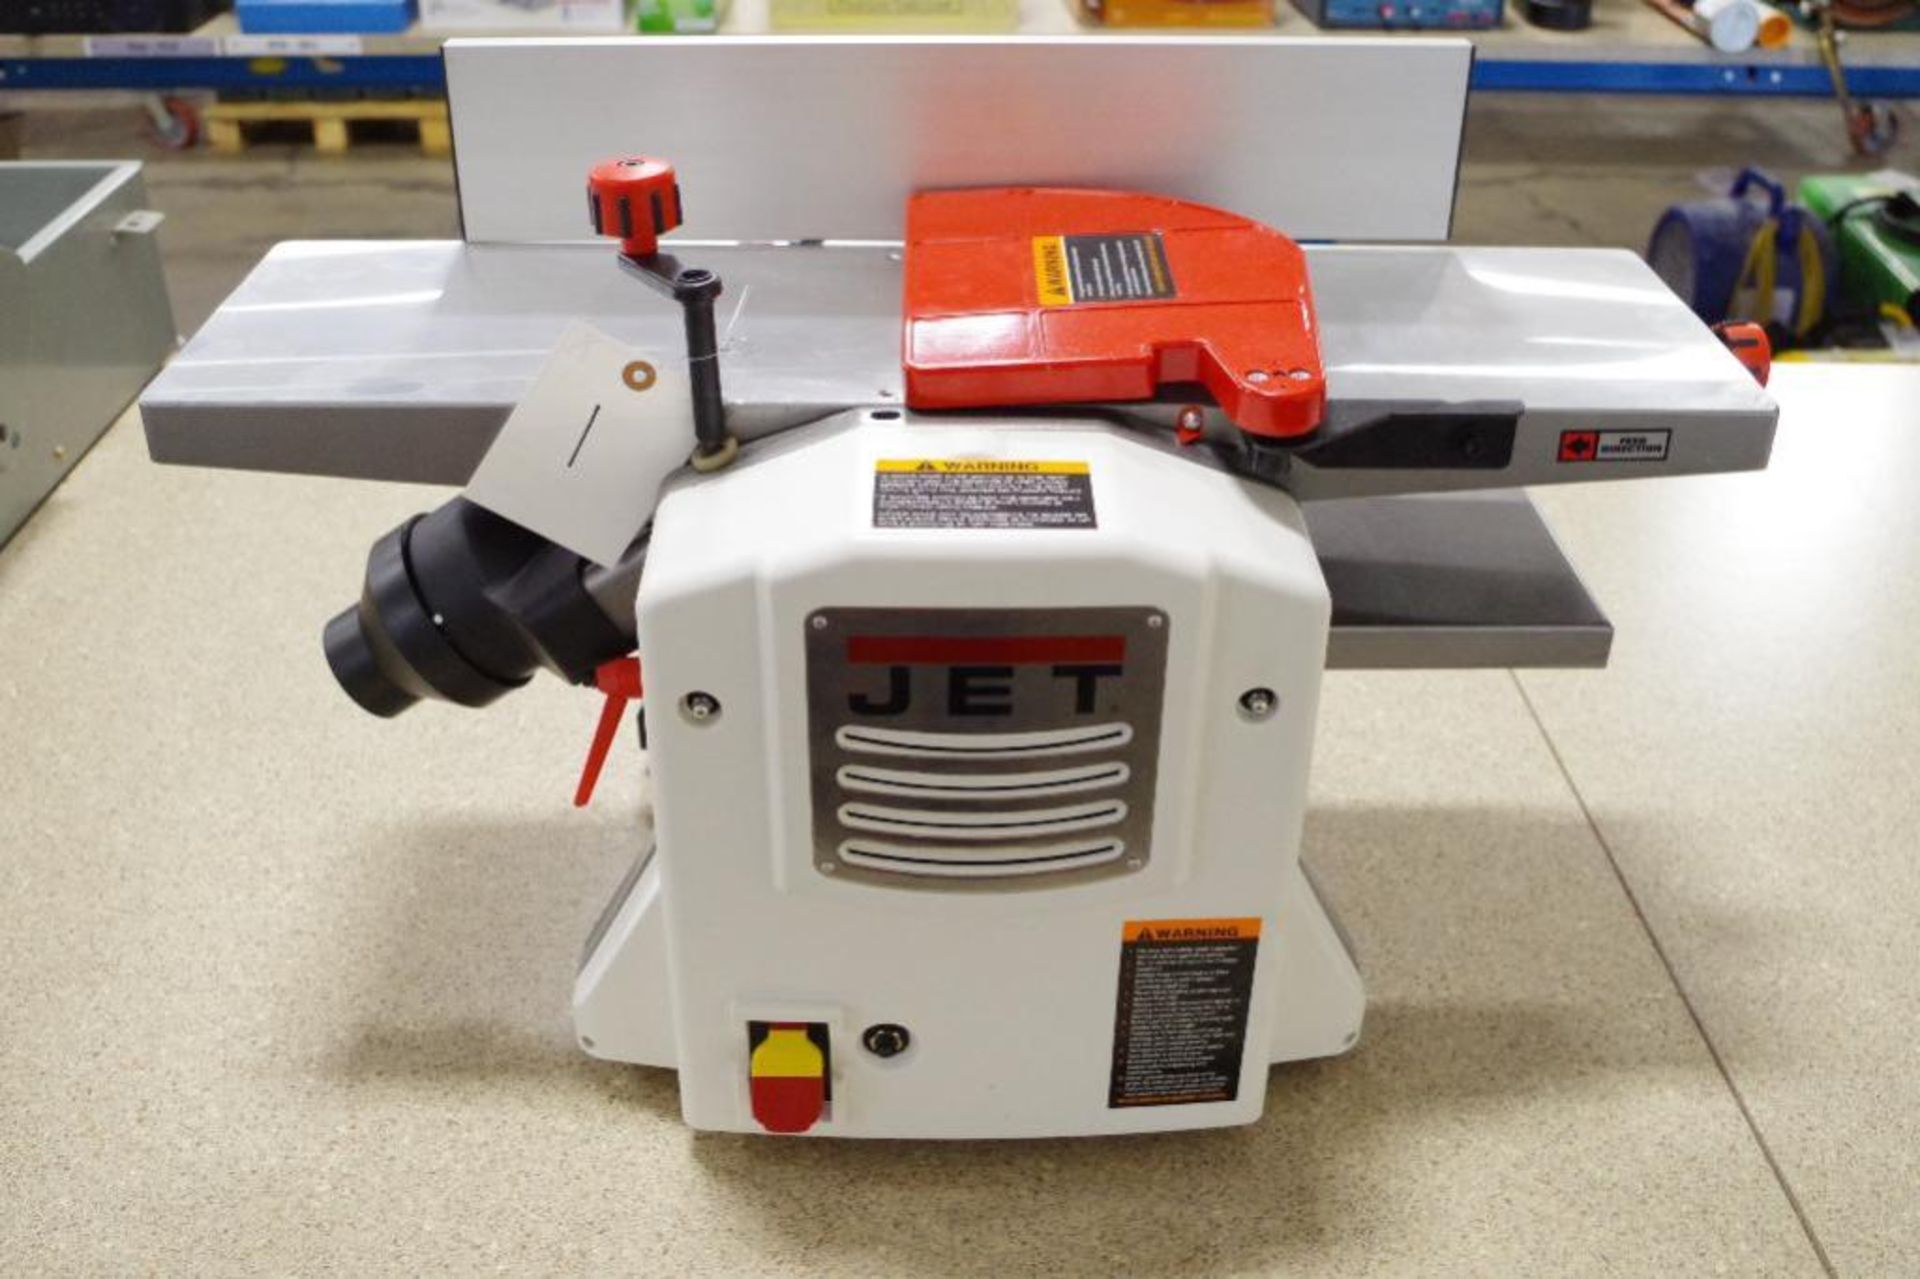 NEW JET 8" Jointer/Planer w/ Chip/Dust Collection Connection - Image 2 of 6